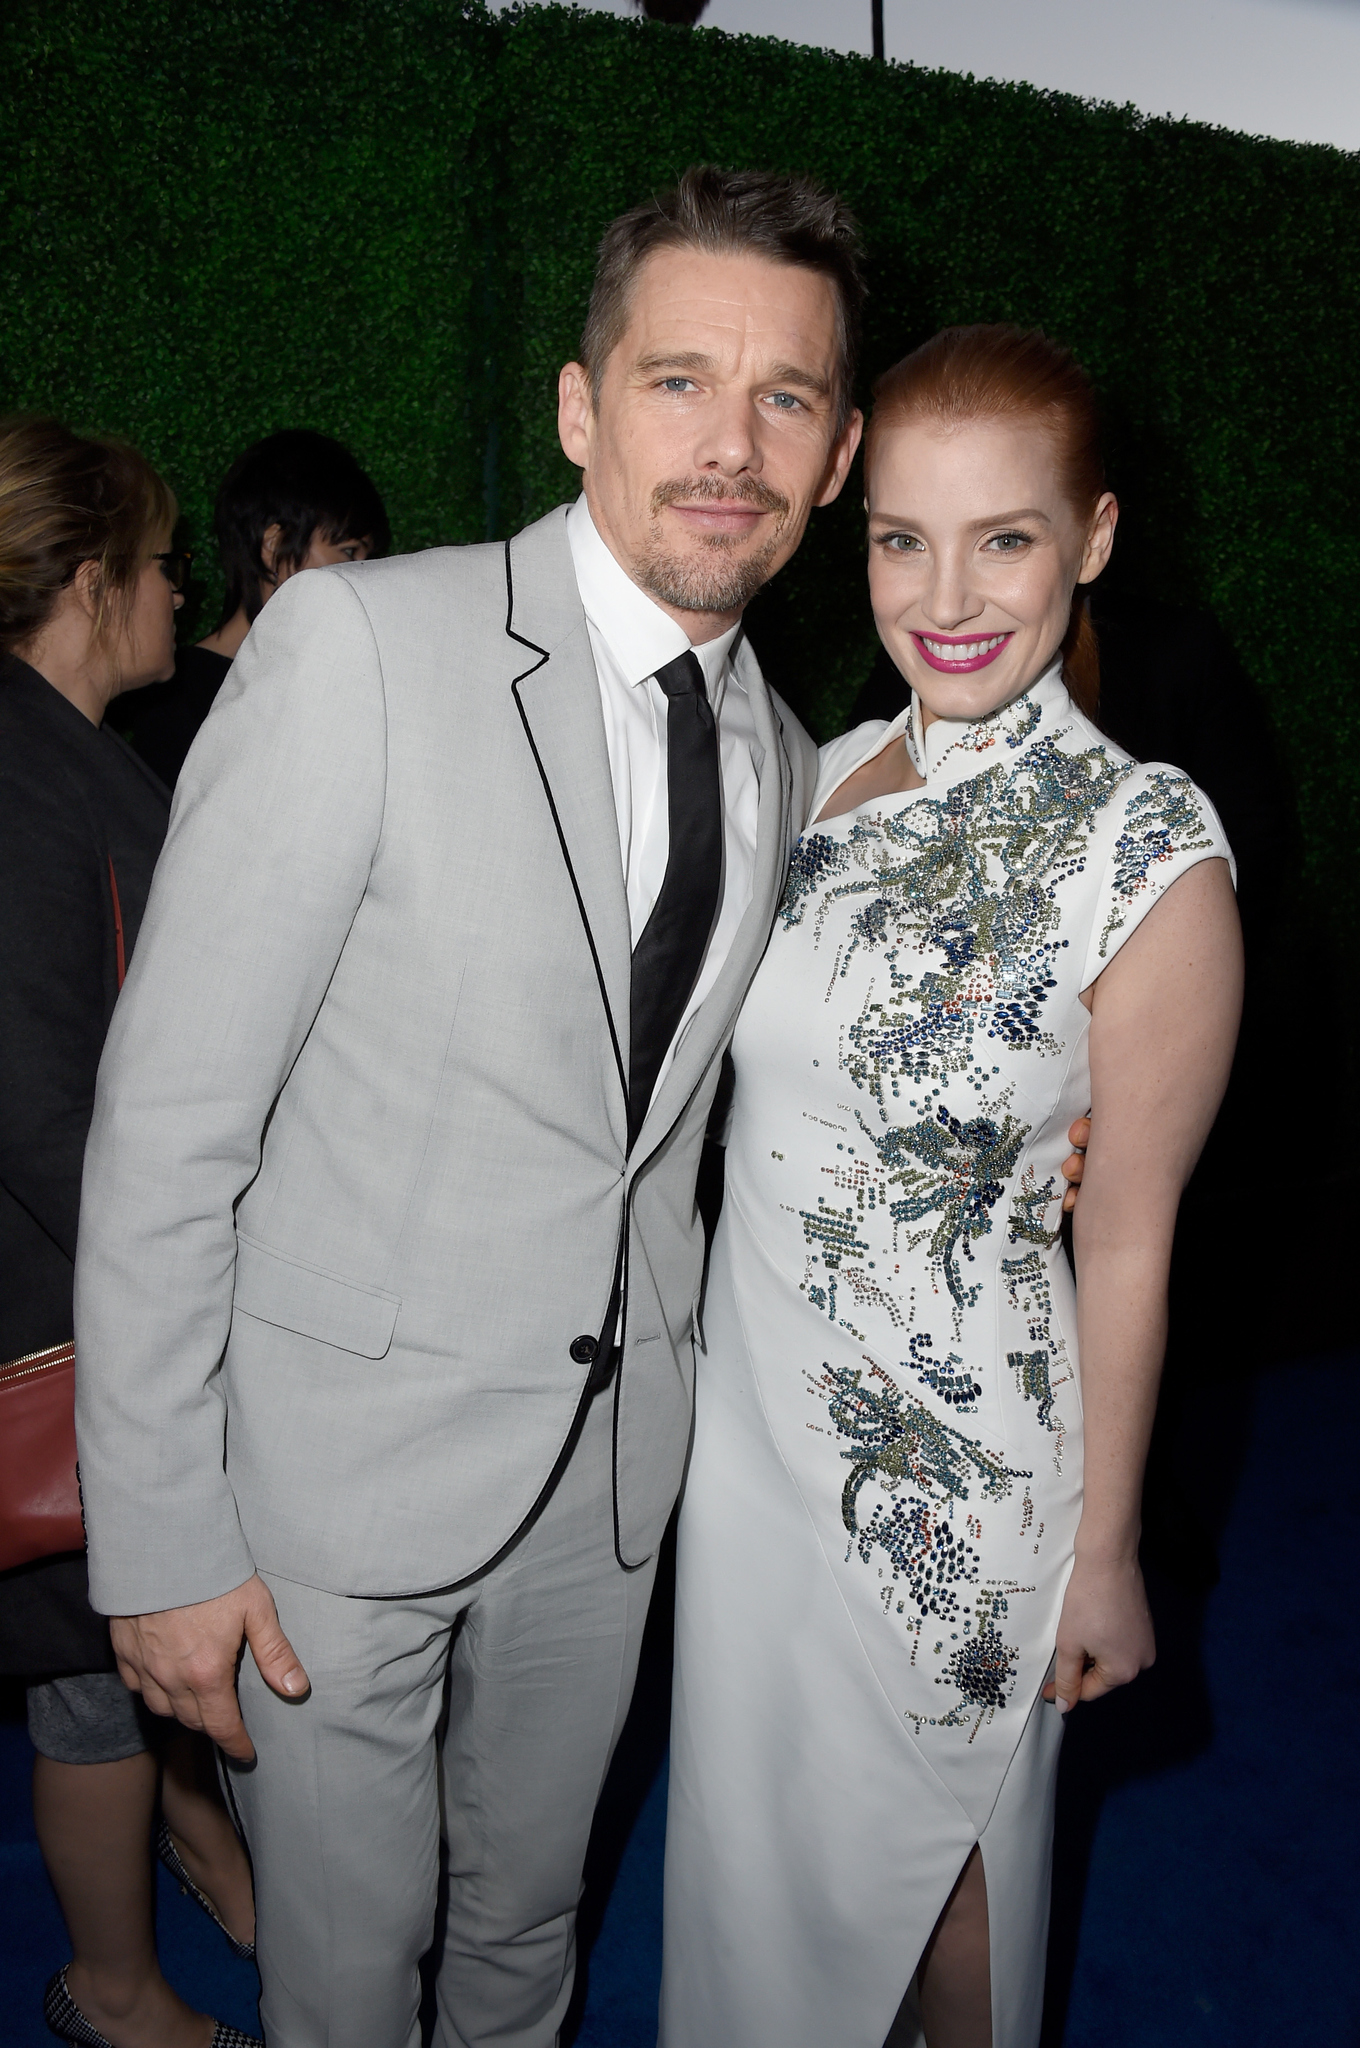 Ethan Hawke and Jessica Chastain